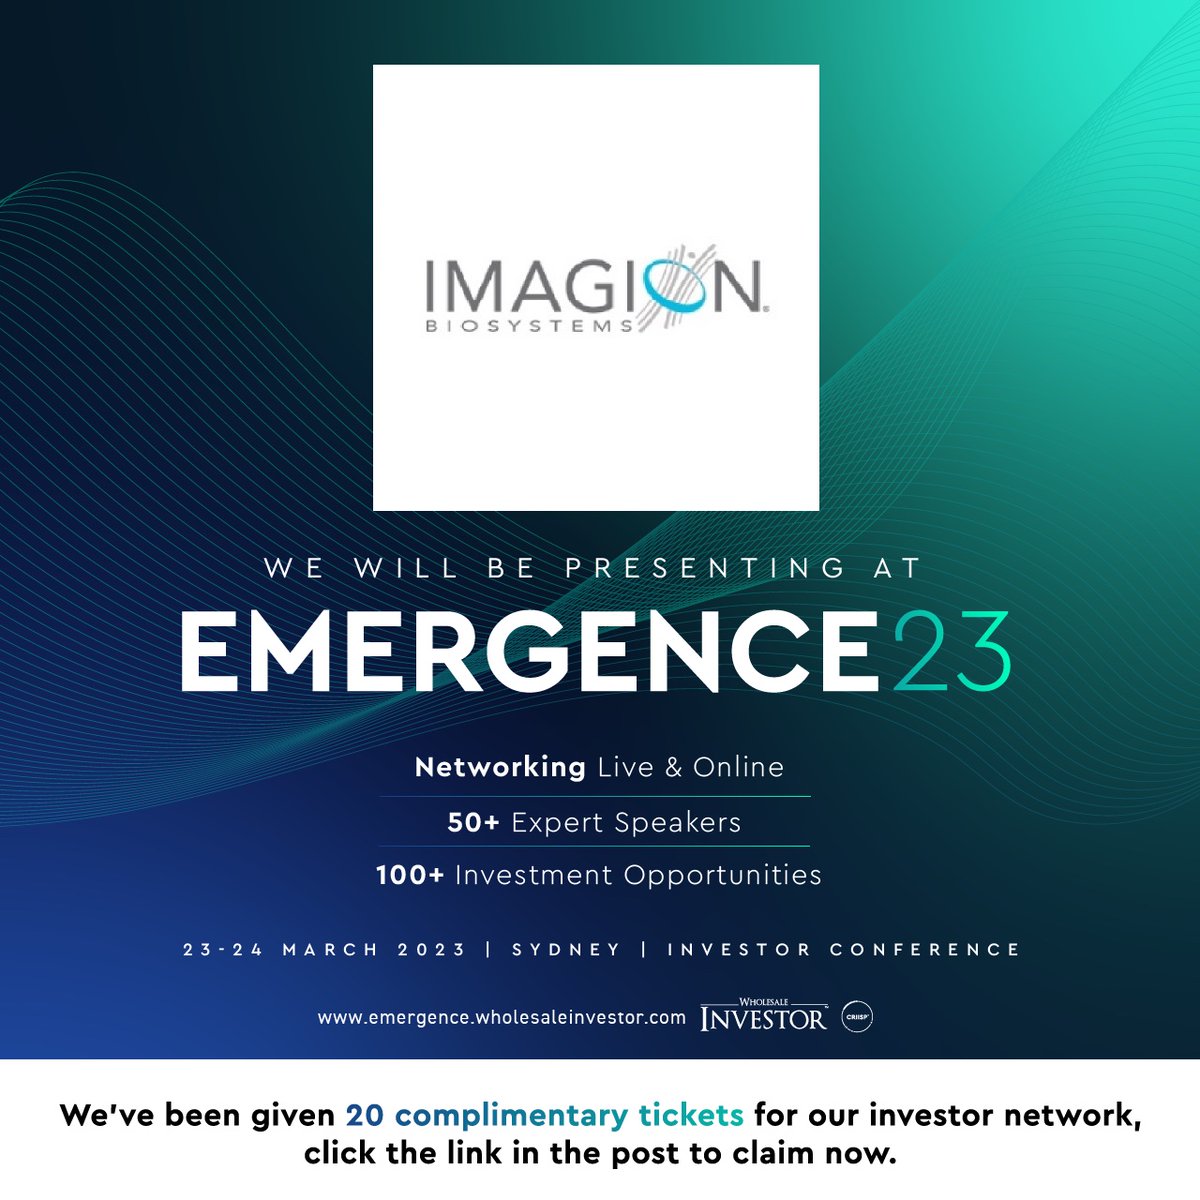 Join us online or in person as we present at Emergence23 in Sydney, 23 March. Complimentary tickets are available to our network by registering here: bit.ly/405Bujw $IBX